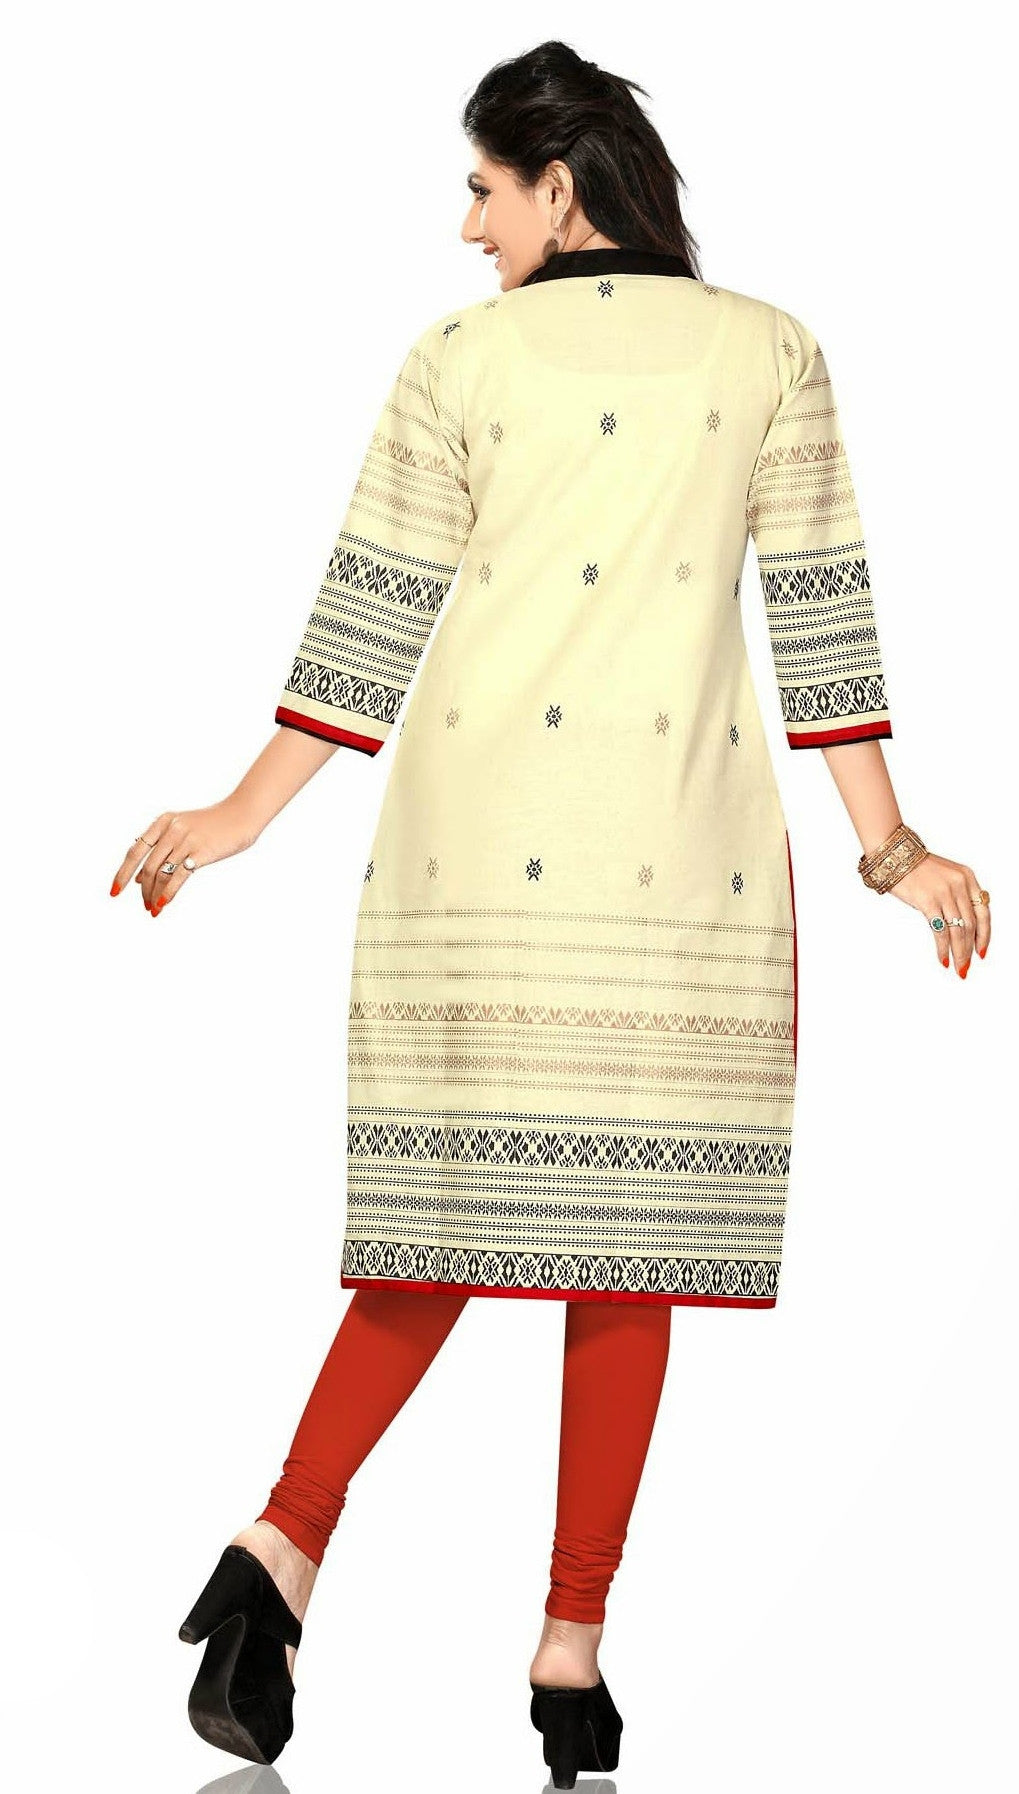 Cotton Knee Long Yellow Gold Printed Kurta With Mandarin Collar With Half  Sleeves, Size: XS - XXXL at Rs 418/piece in Jaipur